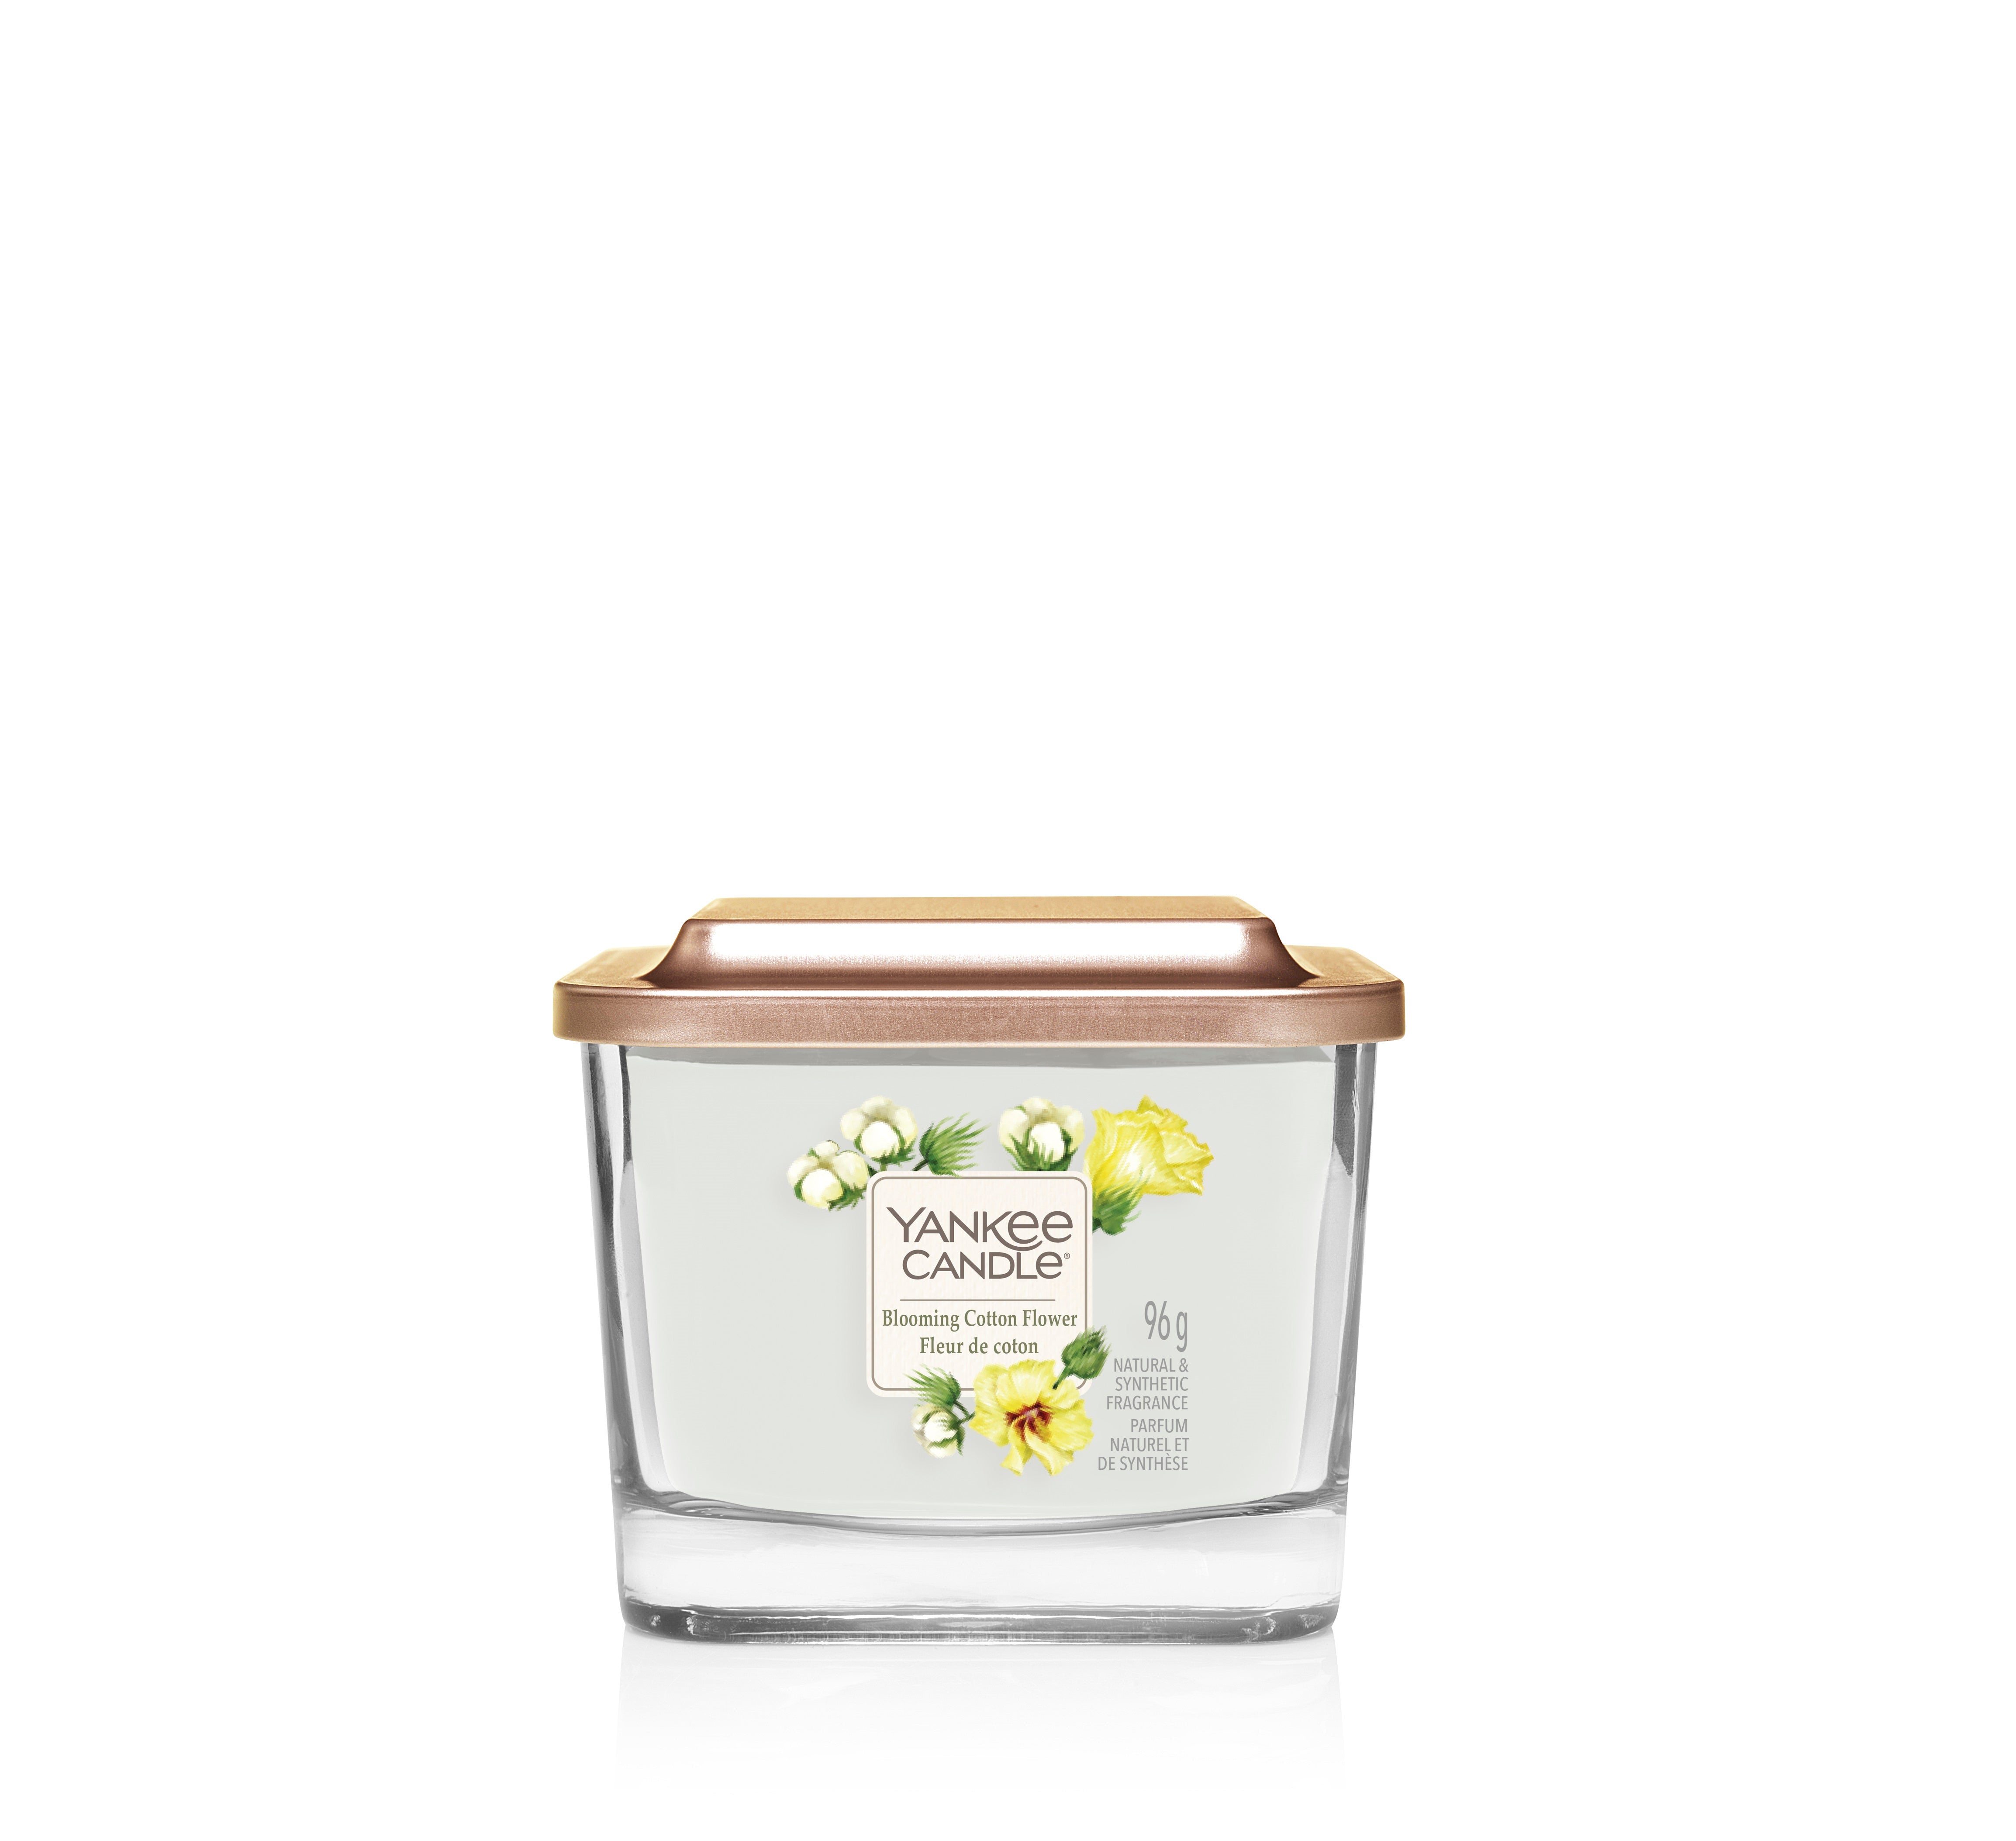 BLOOMING COTTON FLOWER -Yankee Candle- Candela Piccola